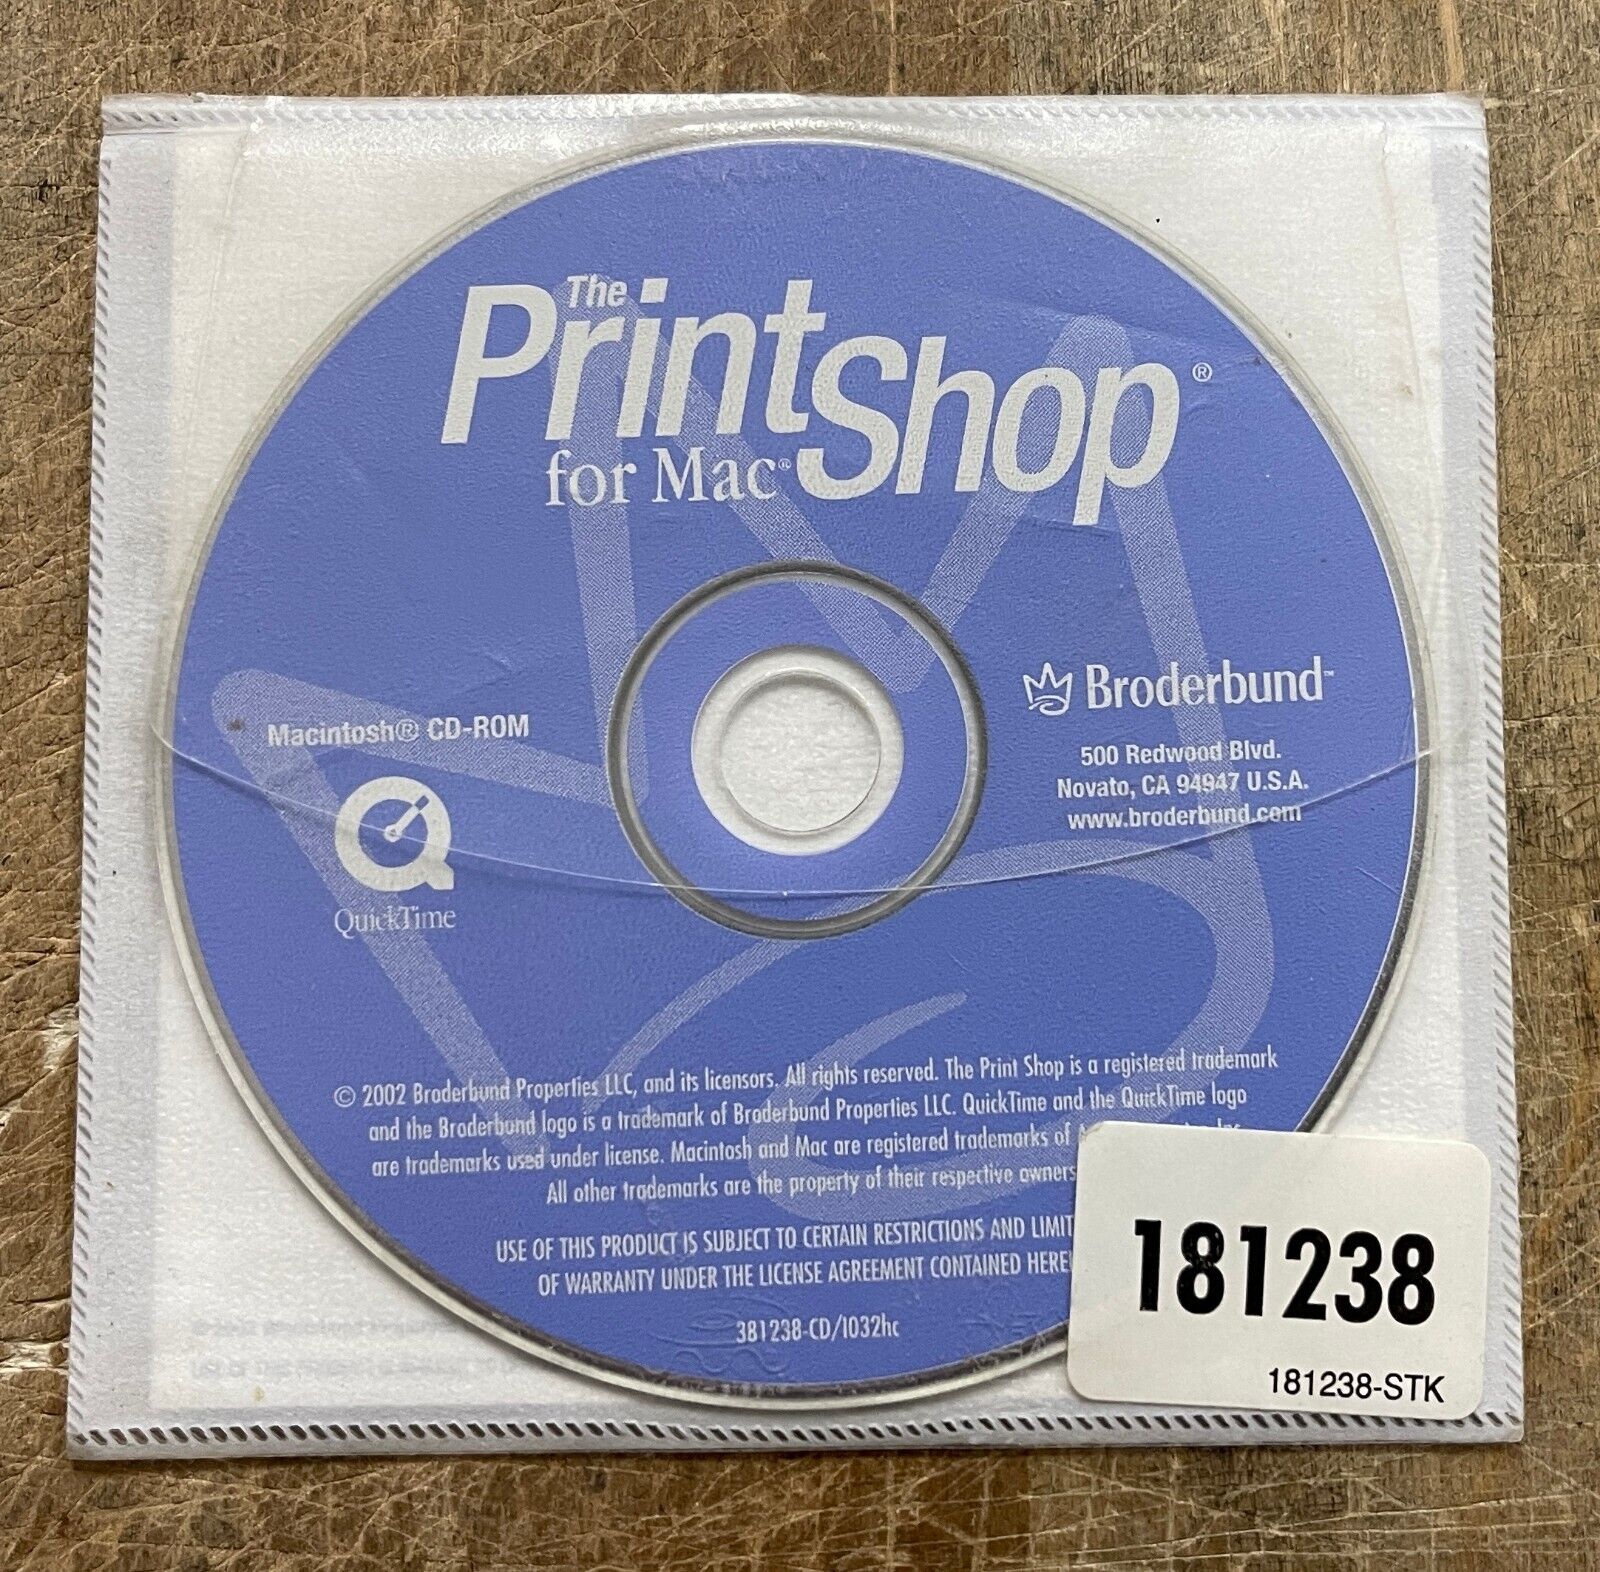 Broderbund The Print Shop for Mac on CD-ROM from 2002